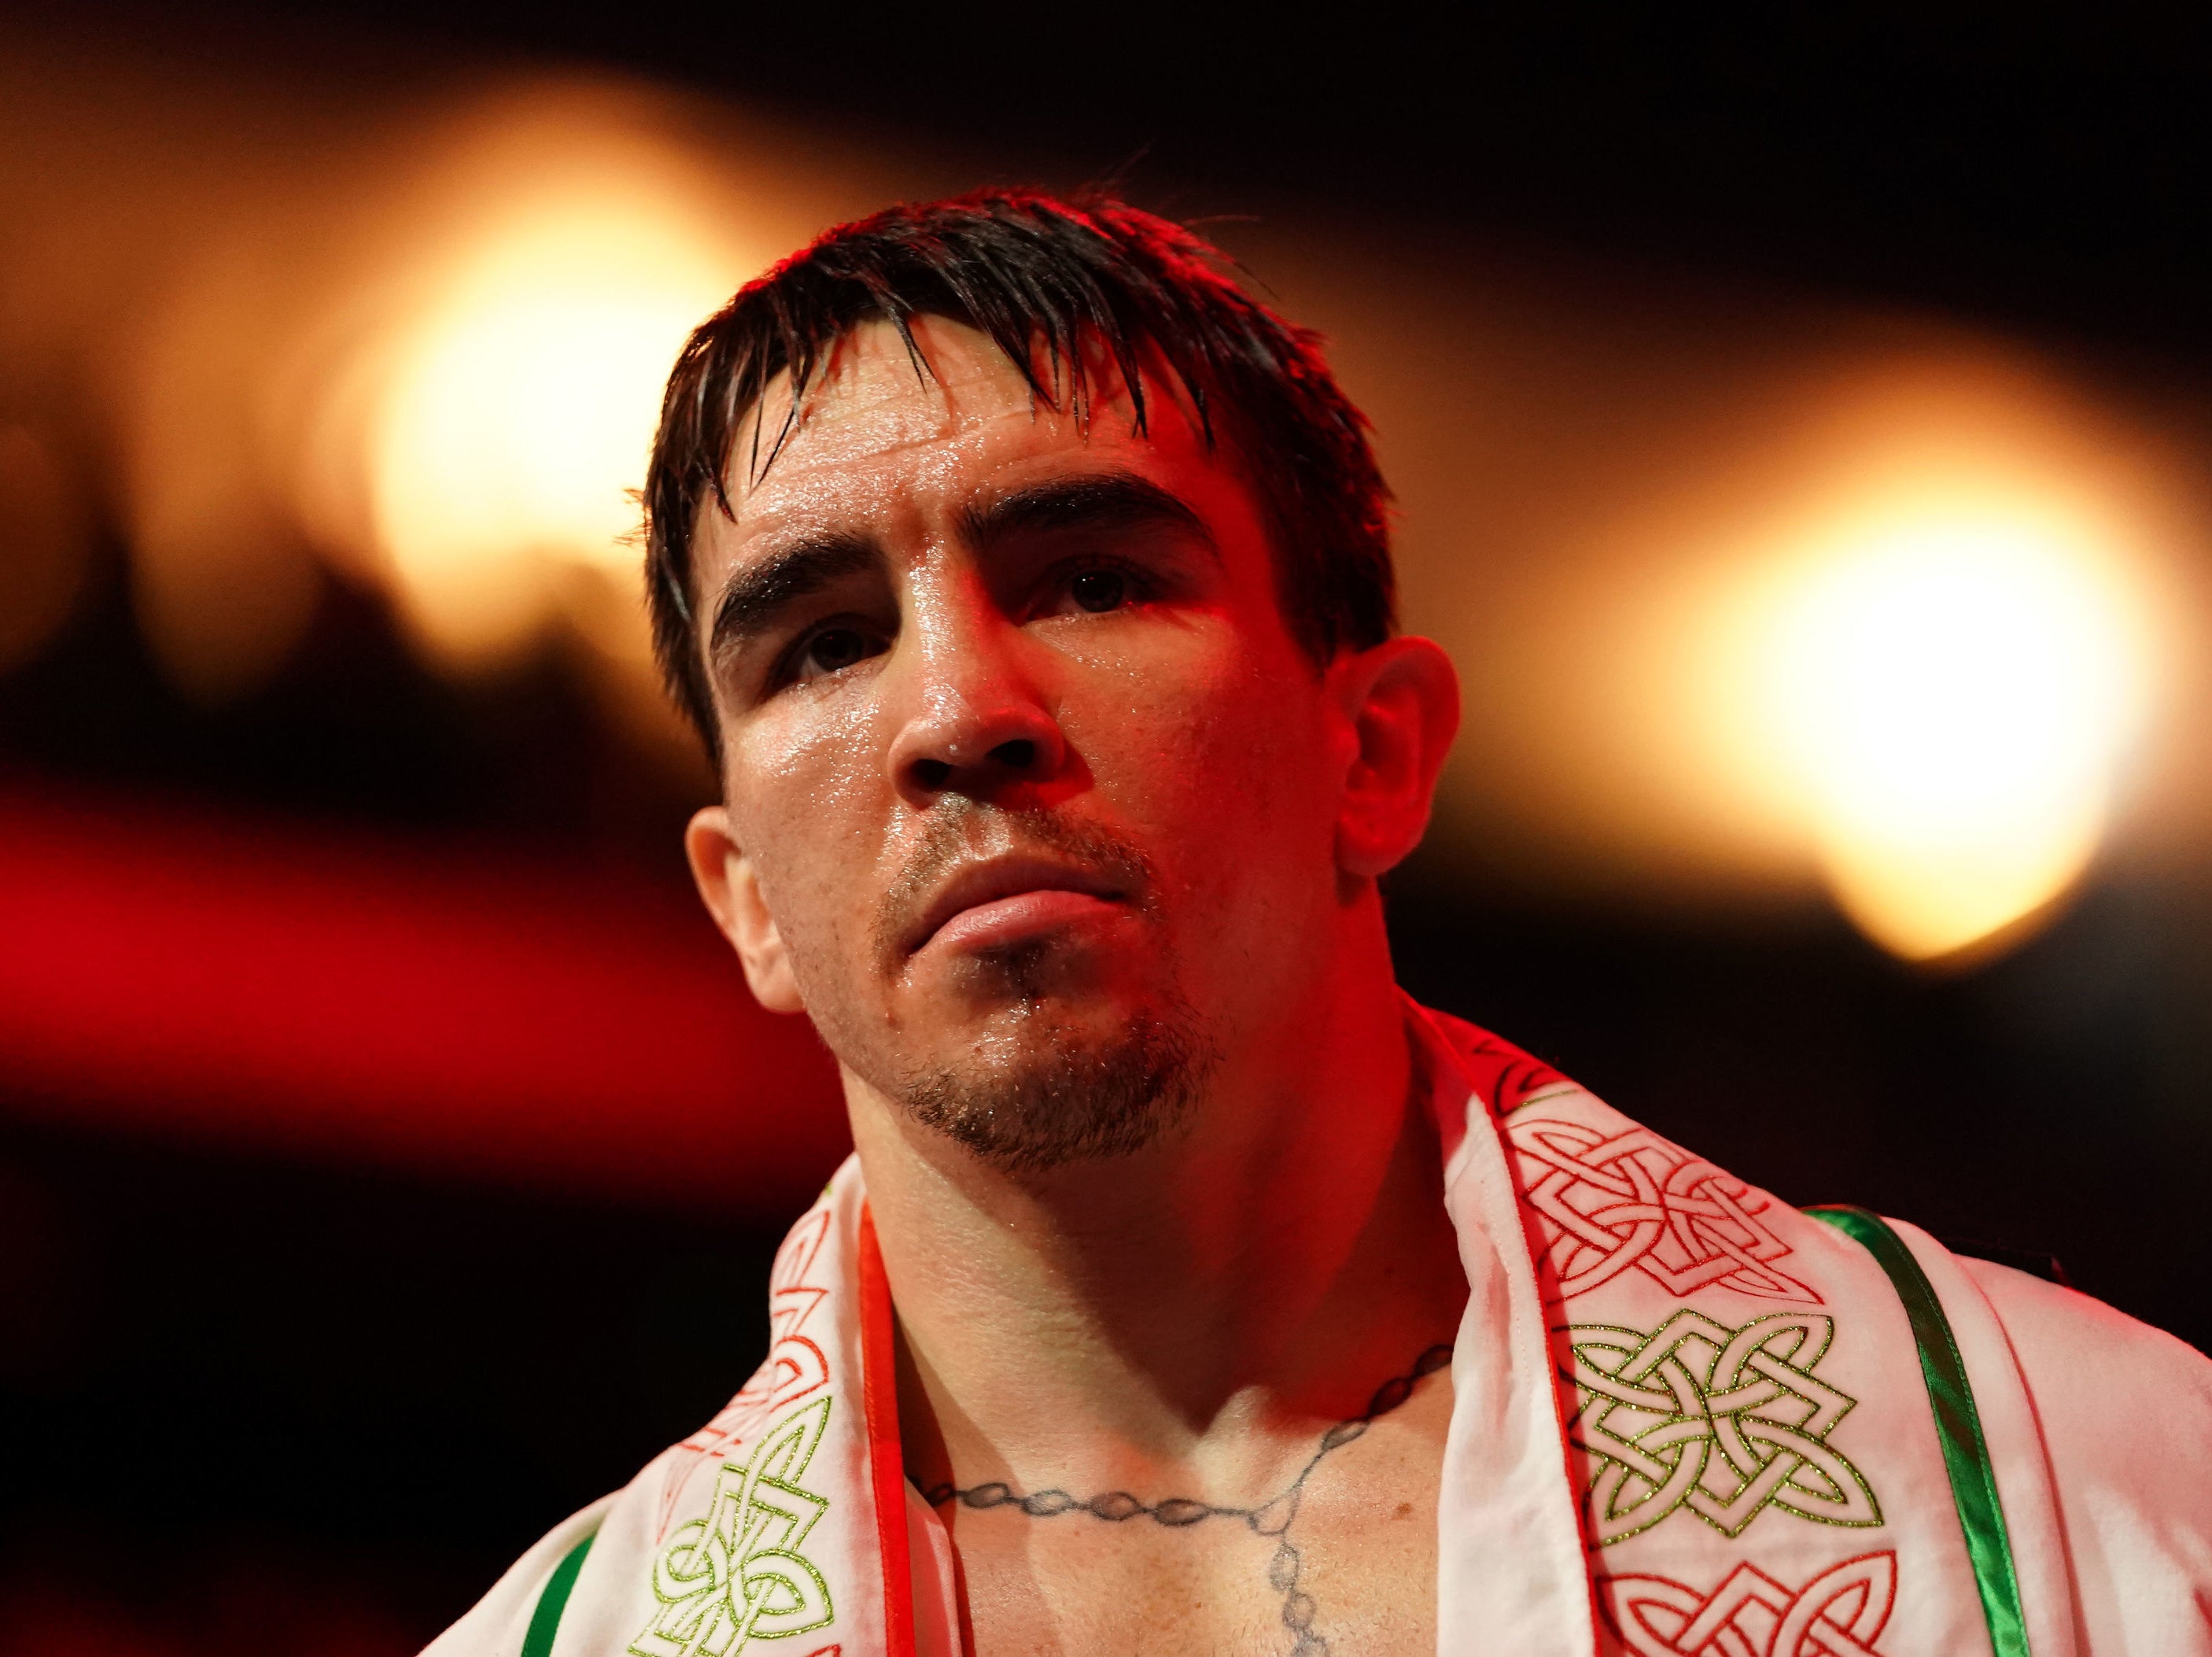 Michael Conlan was stopped by Leigh Wood in the final round of their title fight